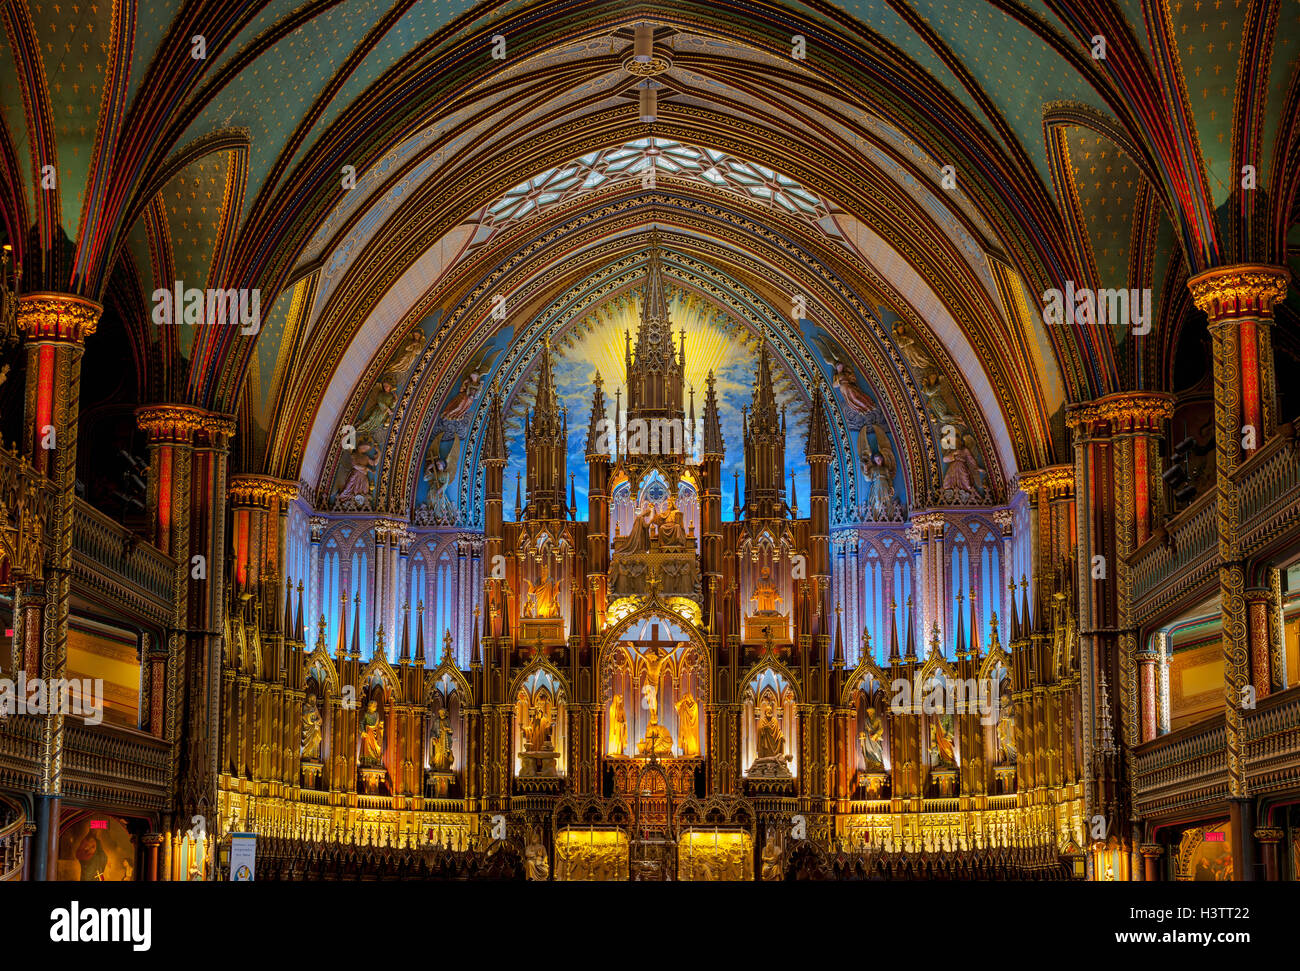 Interior of Notre Dame Basilica, Gothic Revival Architecture, built between 1824 and 1829, Montreal, Quebec, Canada Stock Photo